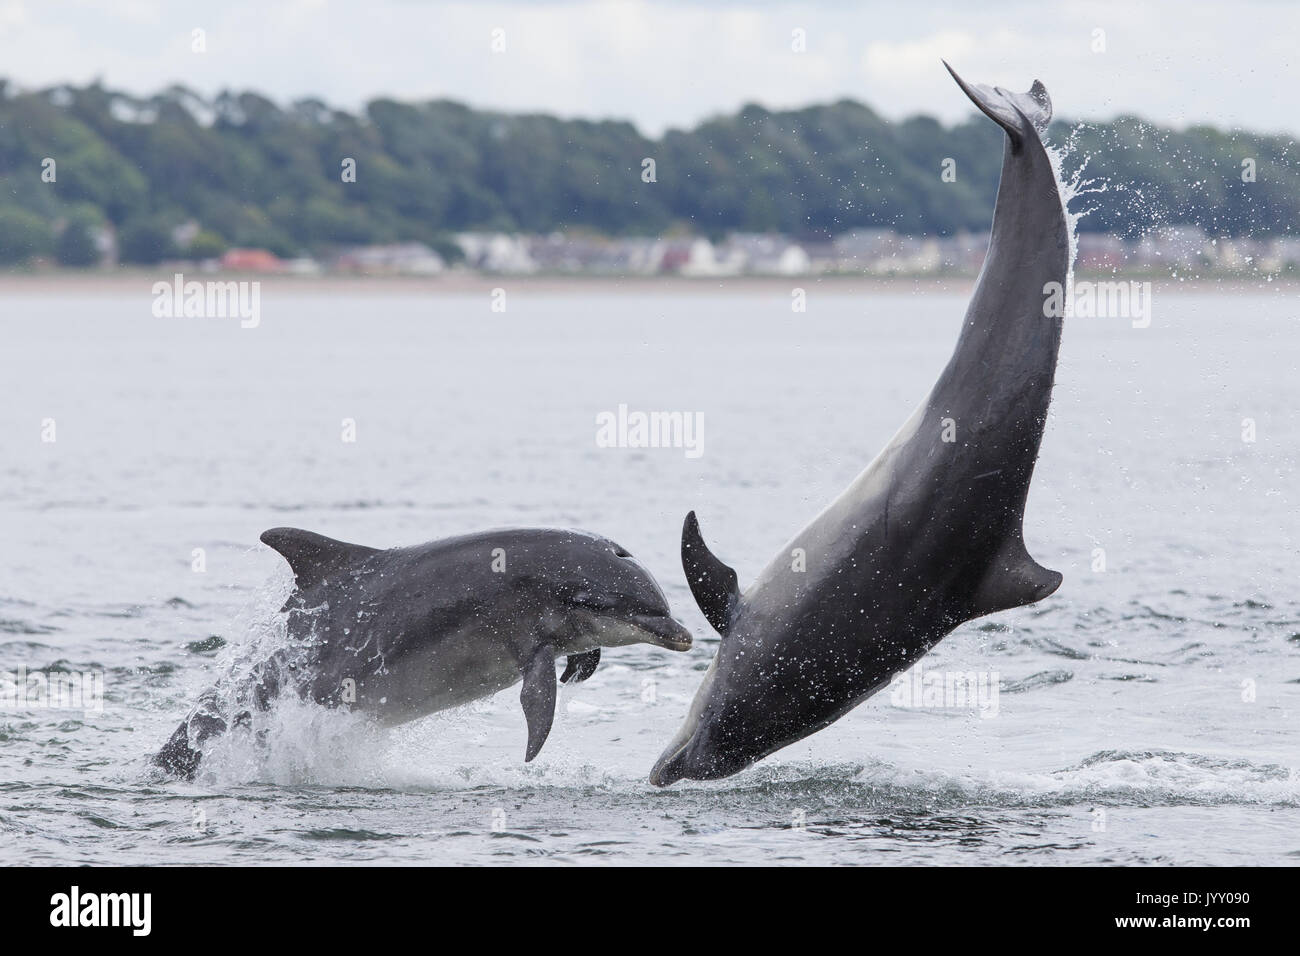 Bottlenose dolphins breaching in the waters of the Moray Firth, near Chanonry Point, in the Scottish Highlands. Stock Photo